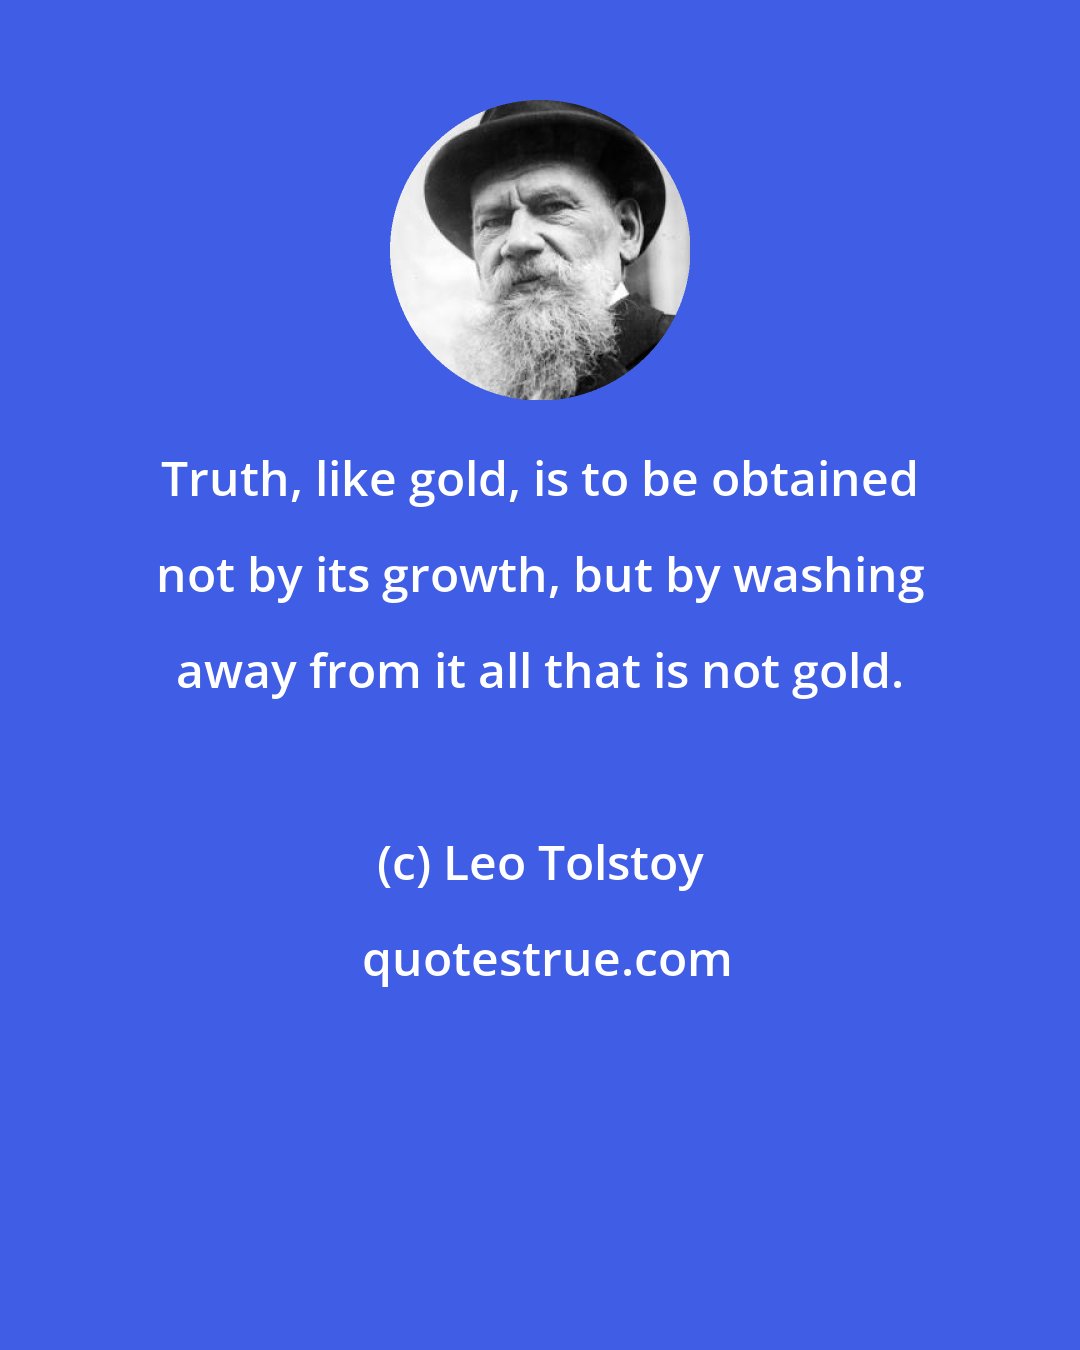 Leo Tolstoy: Truth, like gold, is to be obtained not by its growth, but by washing away from it all that is not gold.